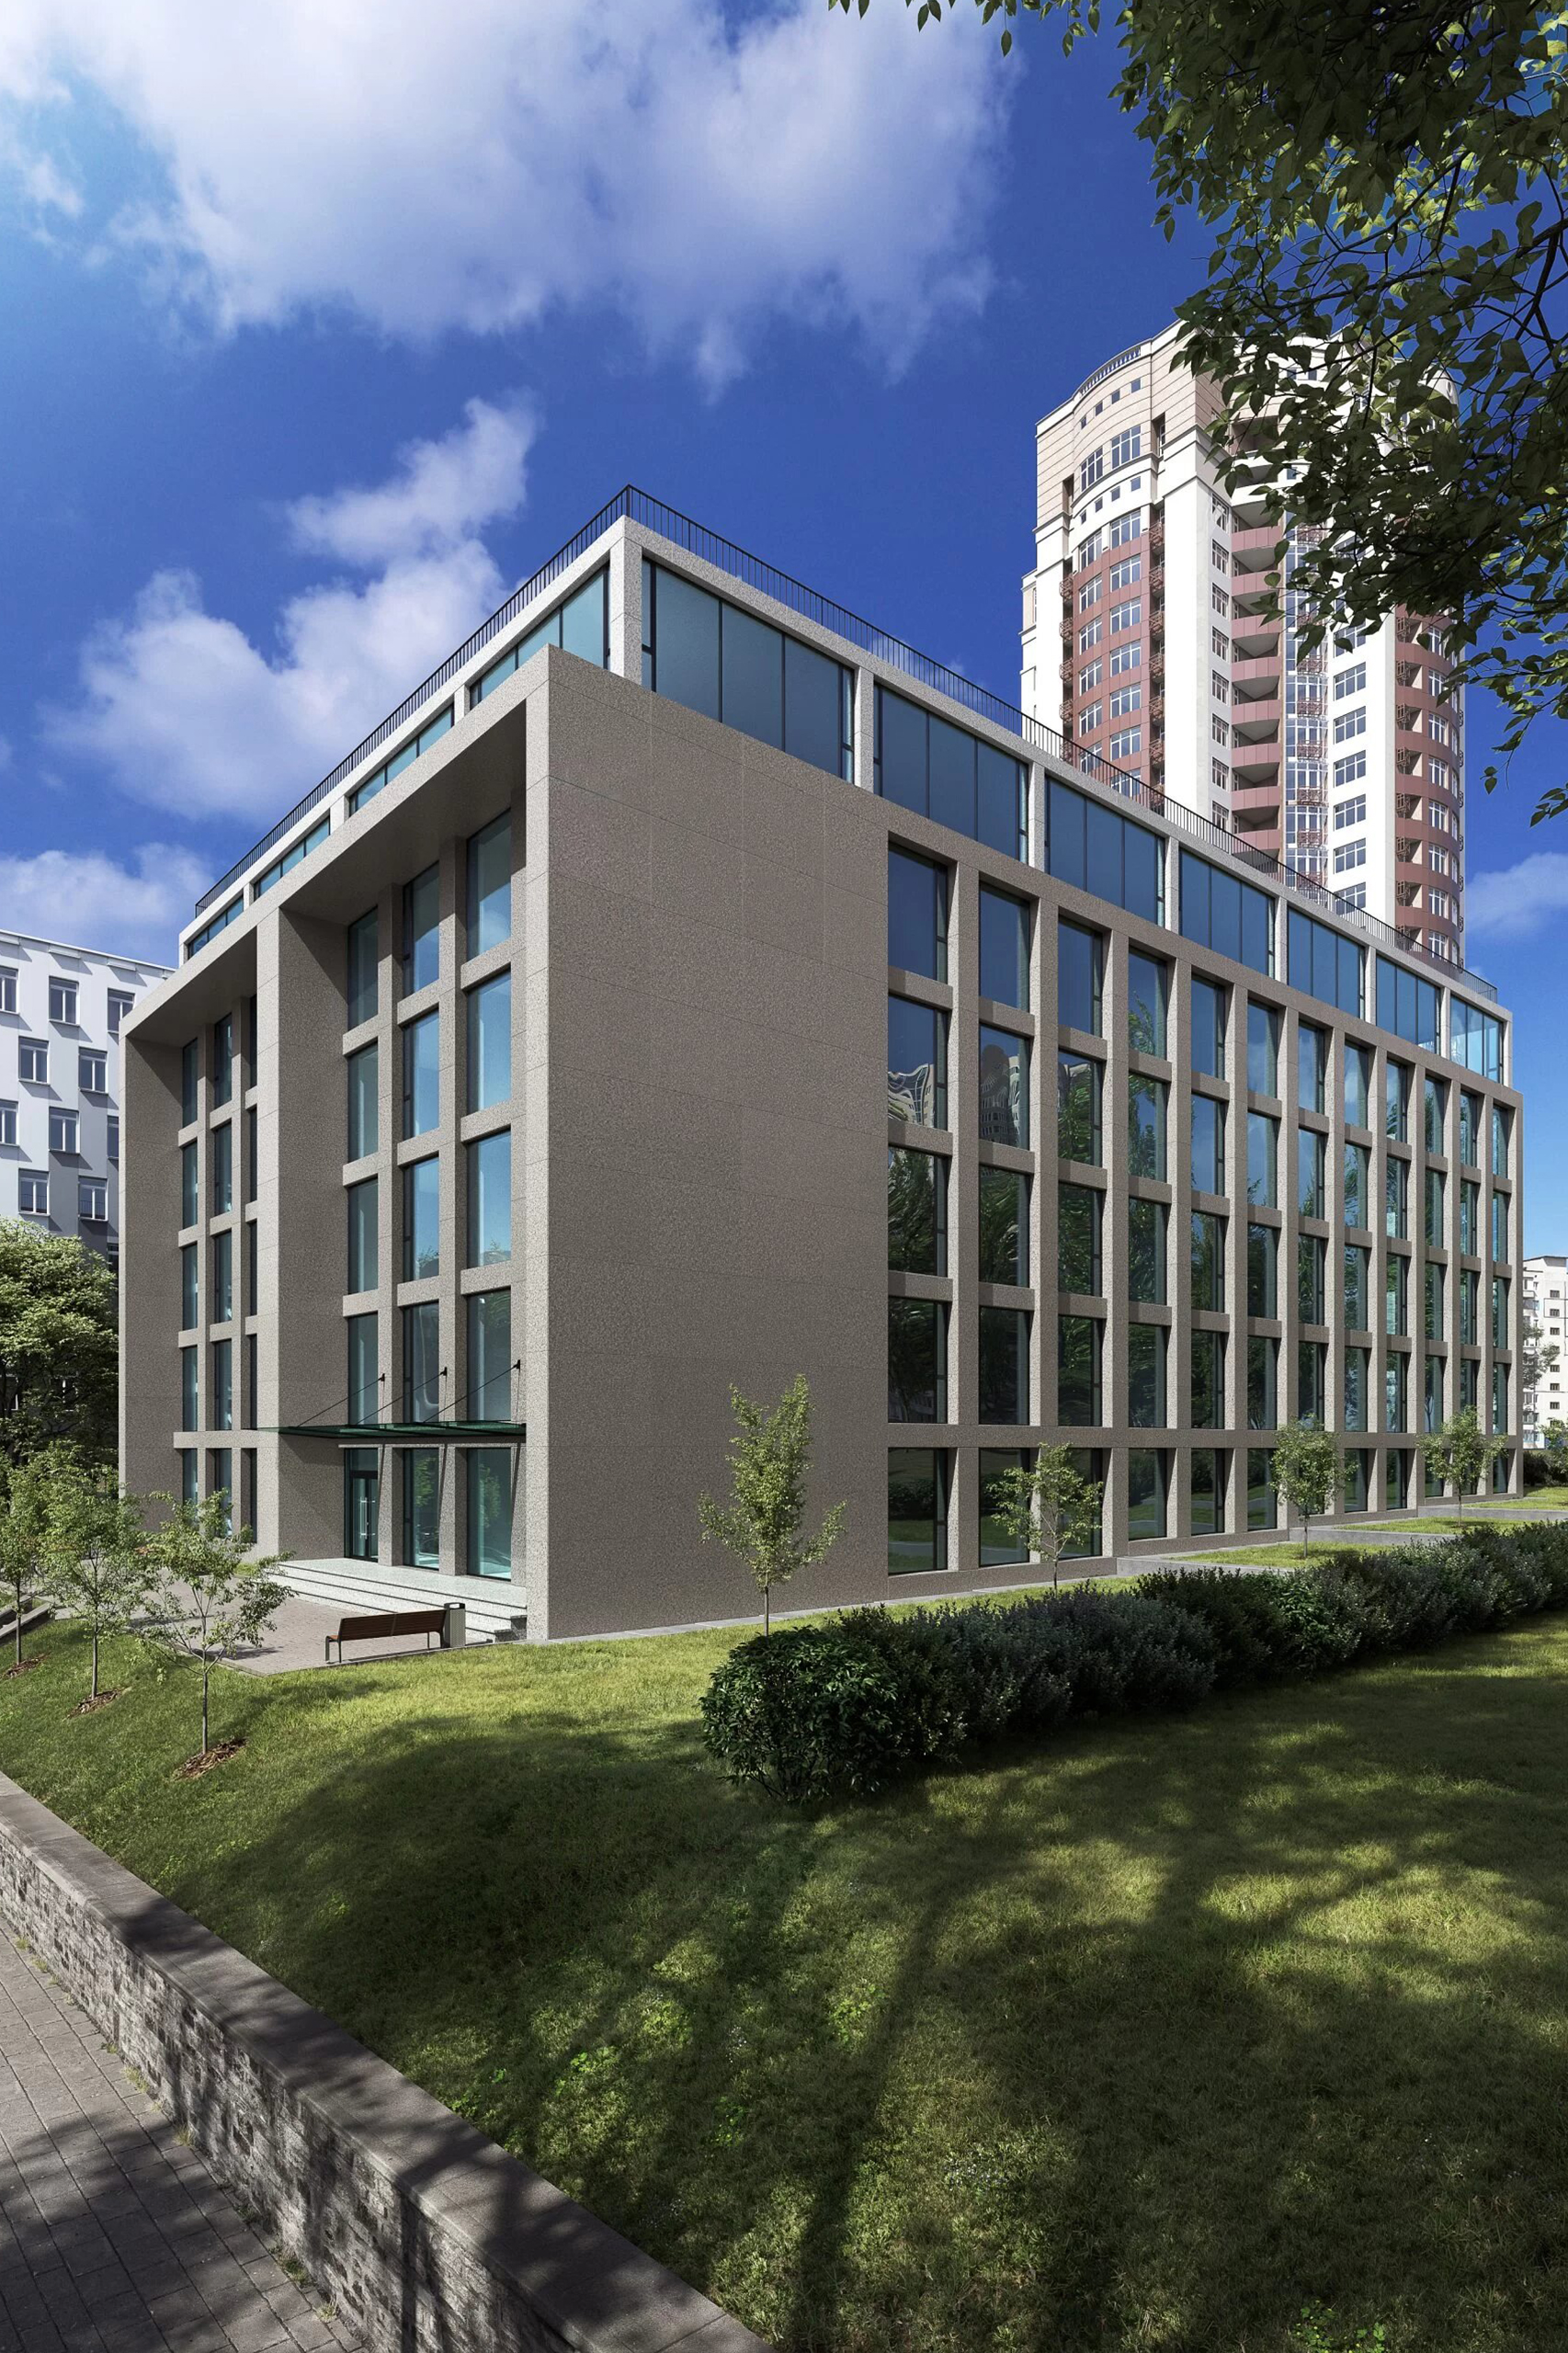 3D Exterior Visualization for an Office